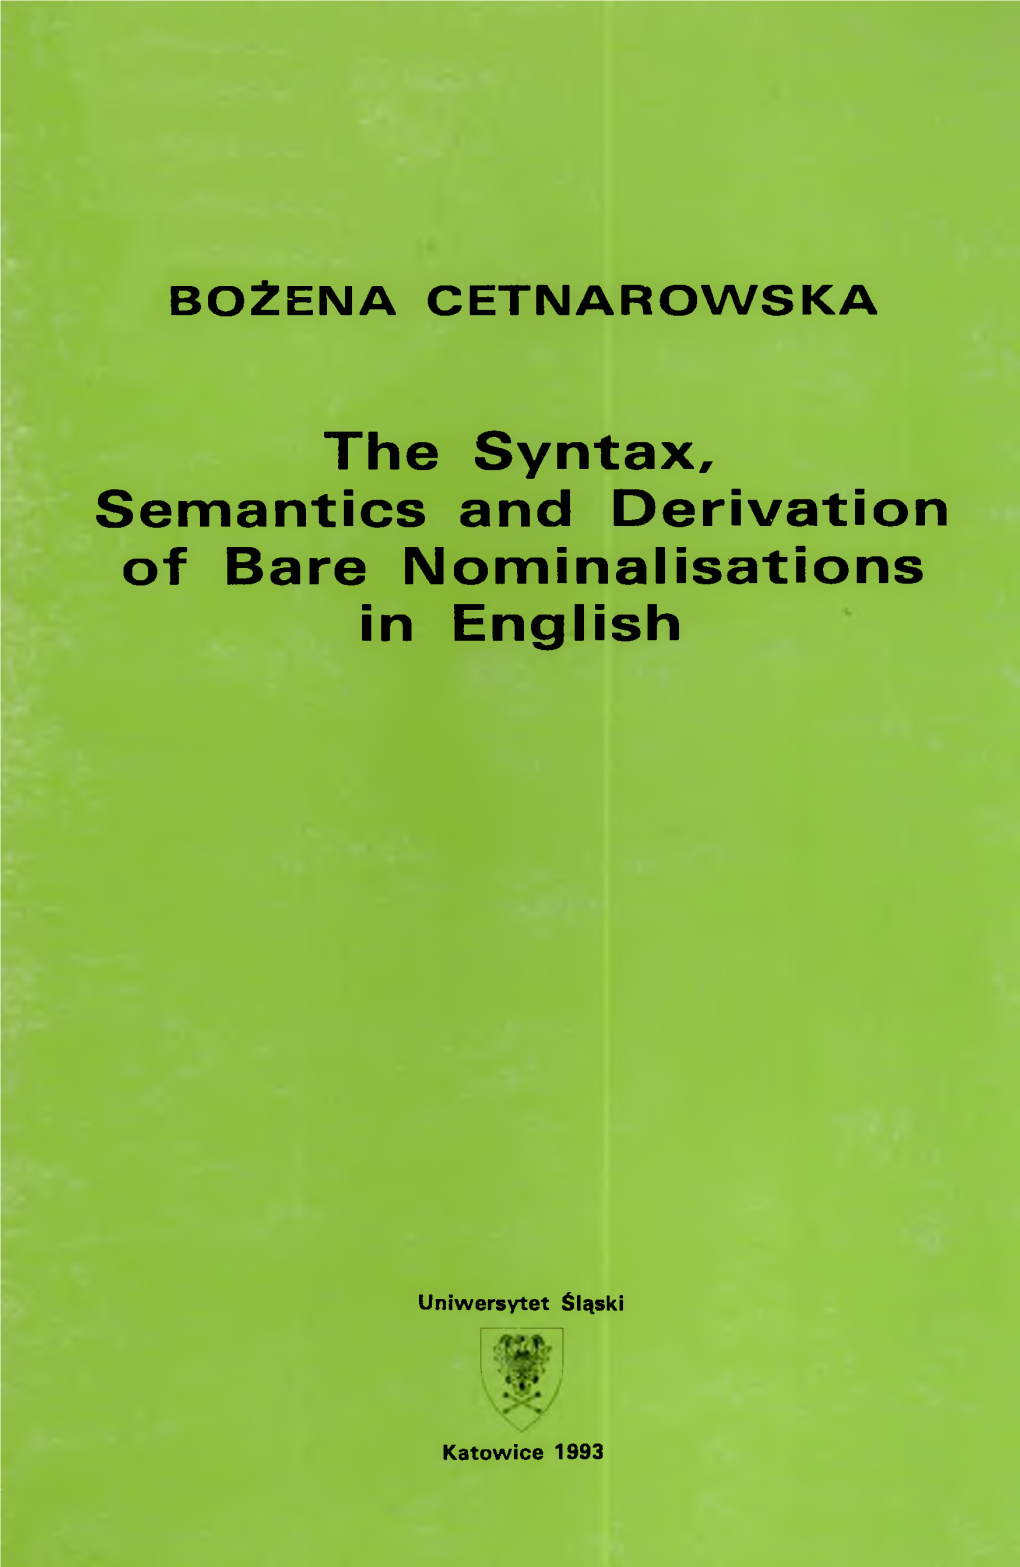 The Syntax, Semantics and Derivation of Bare Nominalisations in English